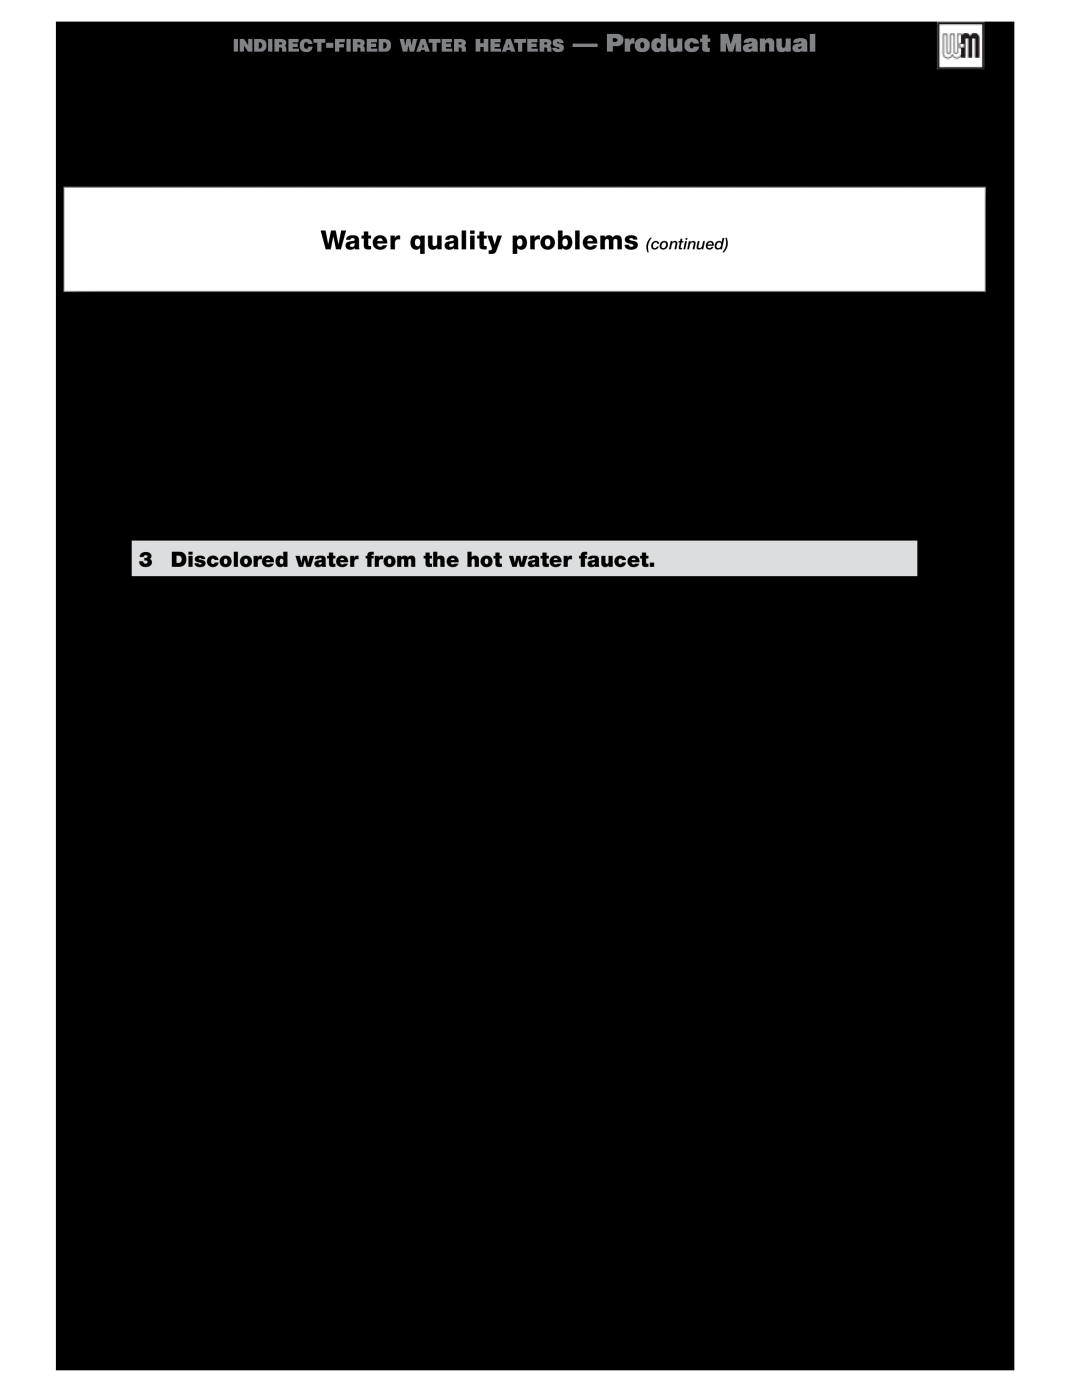 Weil-McLain GL-E223-ADOC 0311 manual Water quality problems continued, 3Discolored water from the hot water faucet 